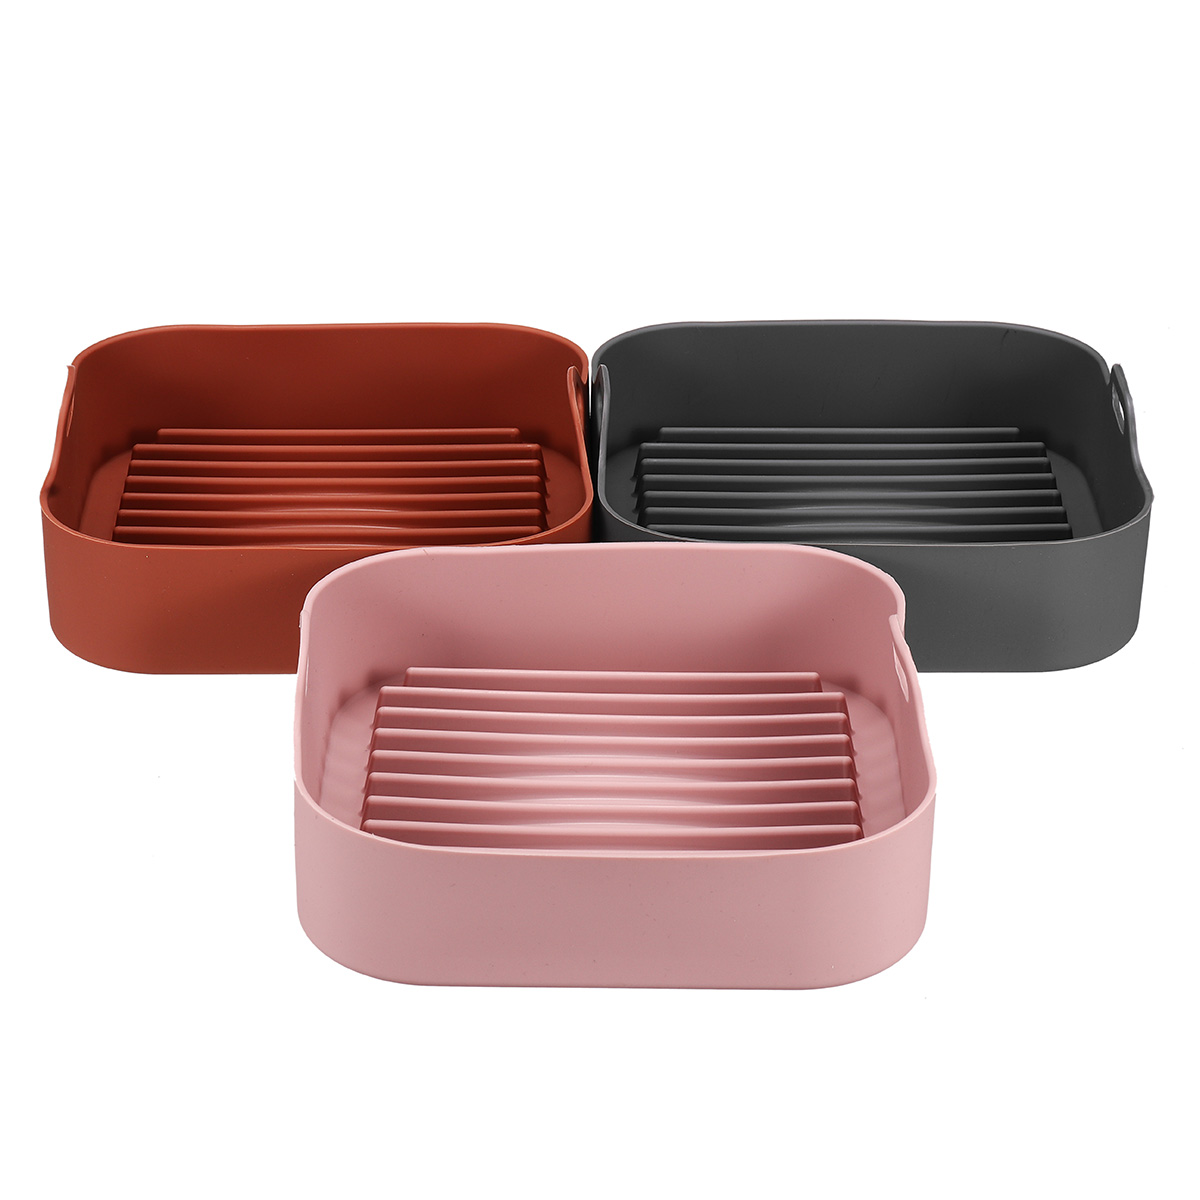 Multifunctional-Silicone-Baking-Tray-High-Temperature-Resistant-Non-stick-Bread-Fried-Baking-Pan-wit-1864776-11